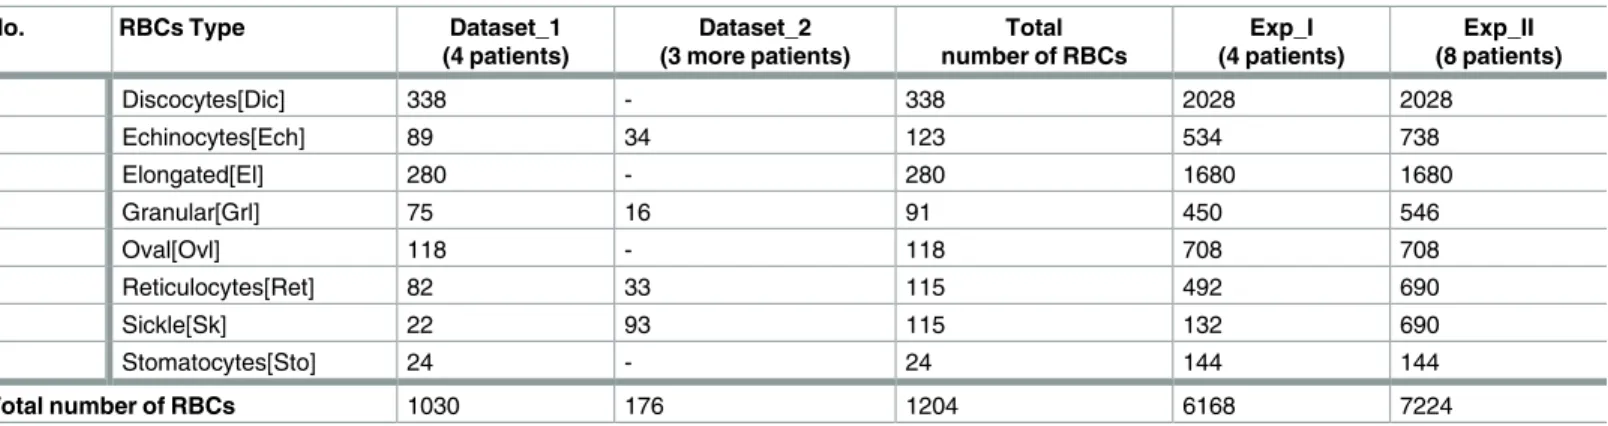 Table 1. Description of our experimental dataset from eight patients’ imaging data.